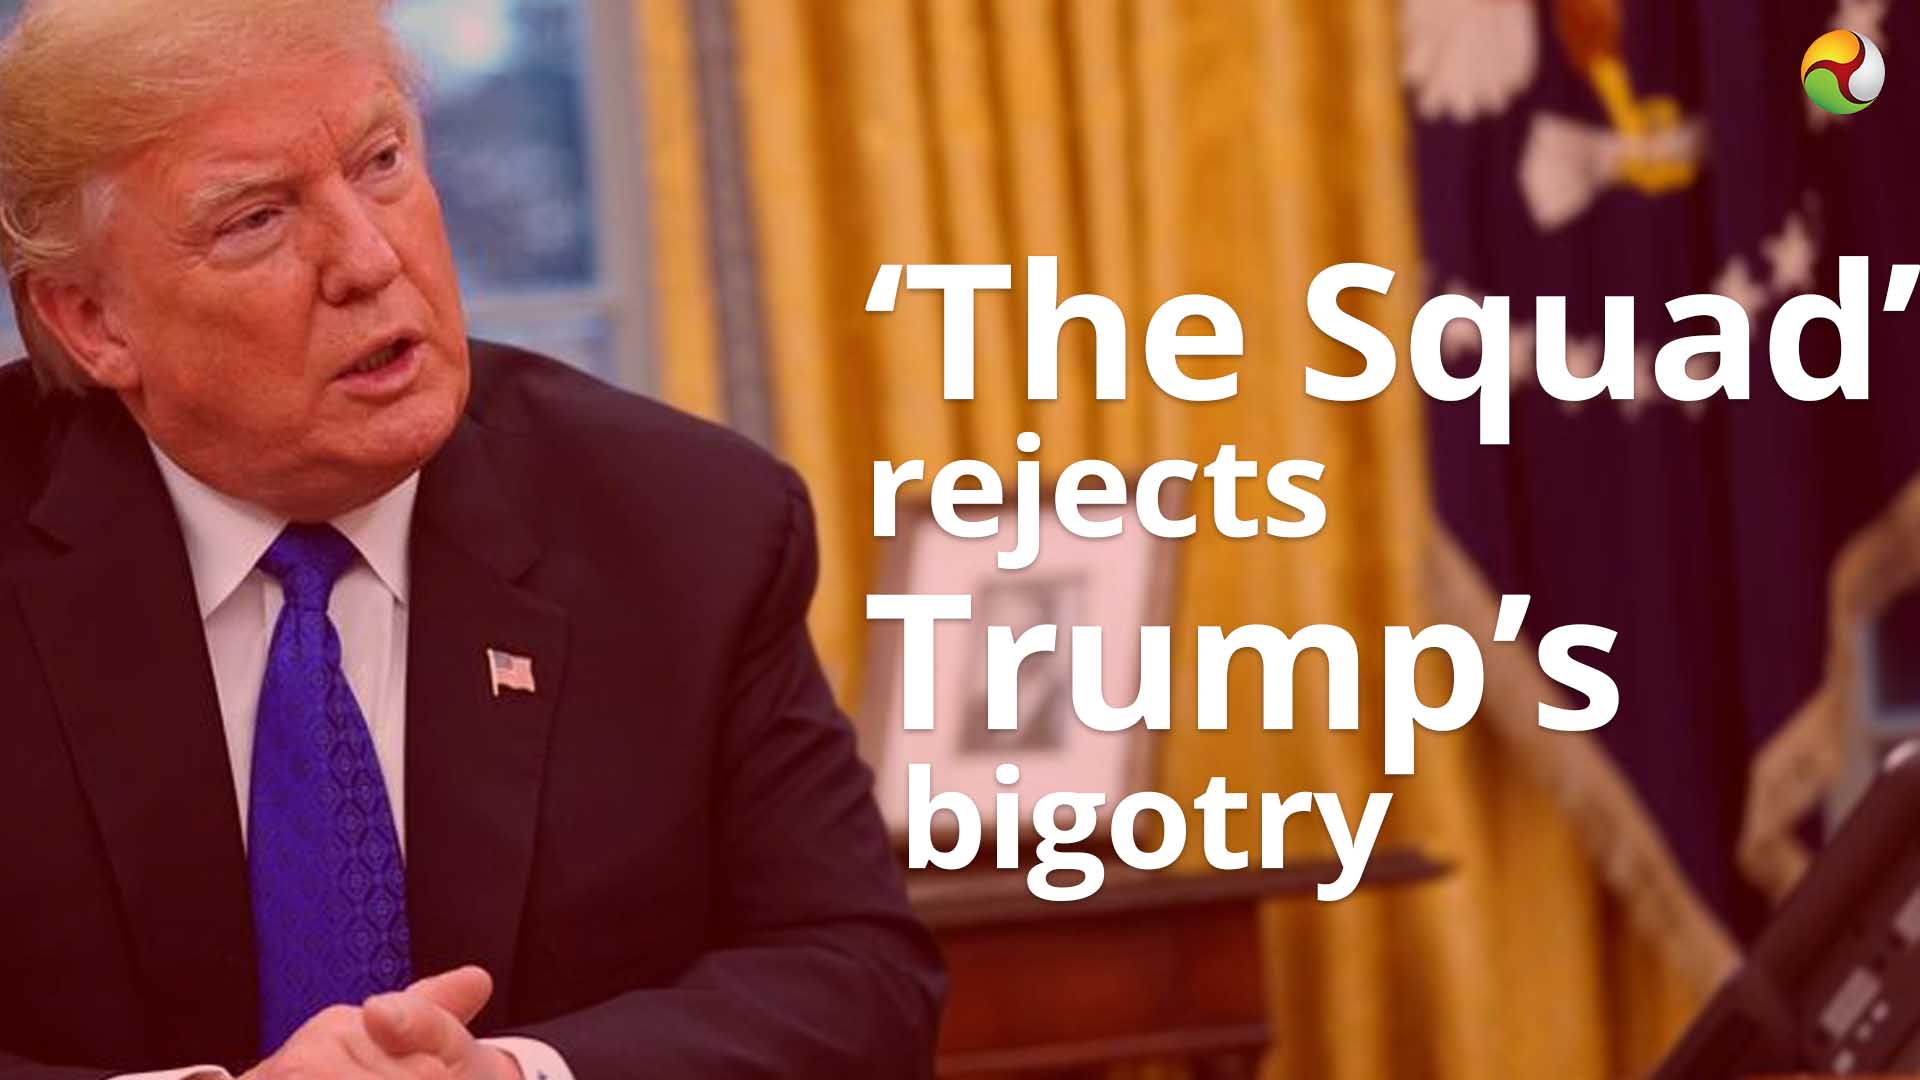 The Squad rejects Trumps bigotry